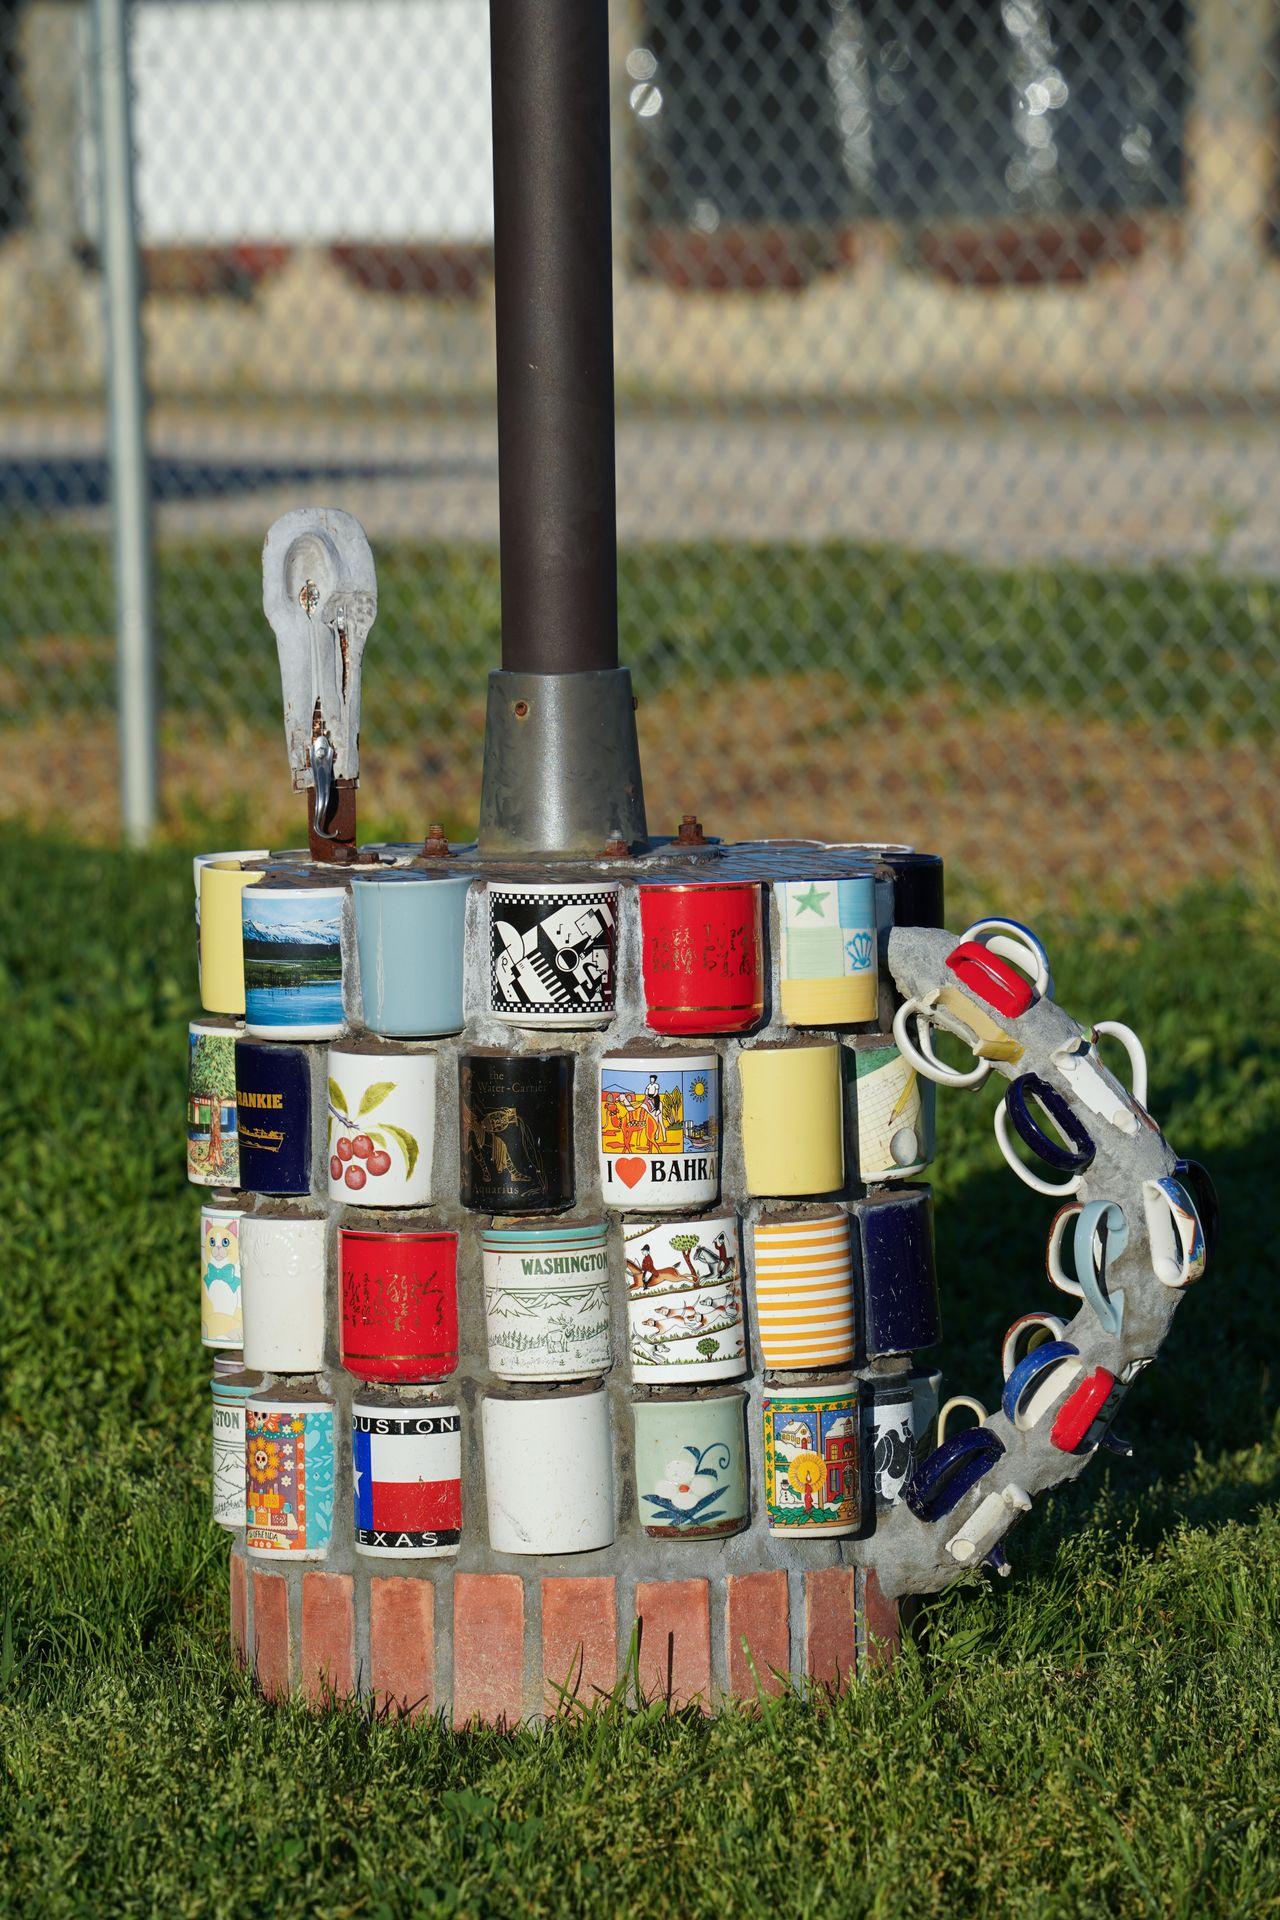 The base of a lamppost, which is shaped like a giant mug made up of many smaller mugs